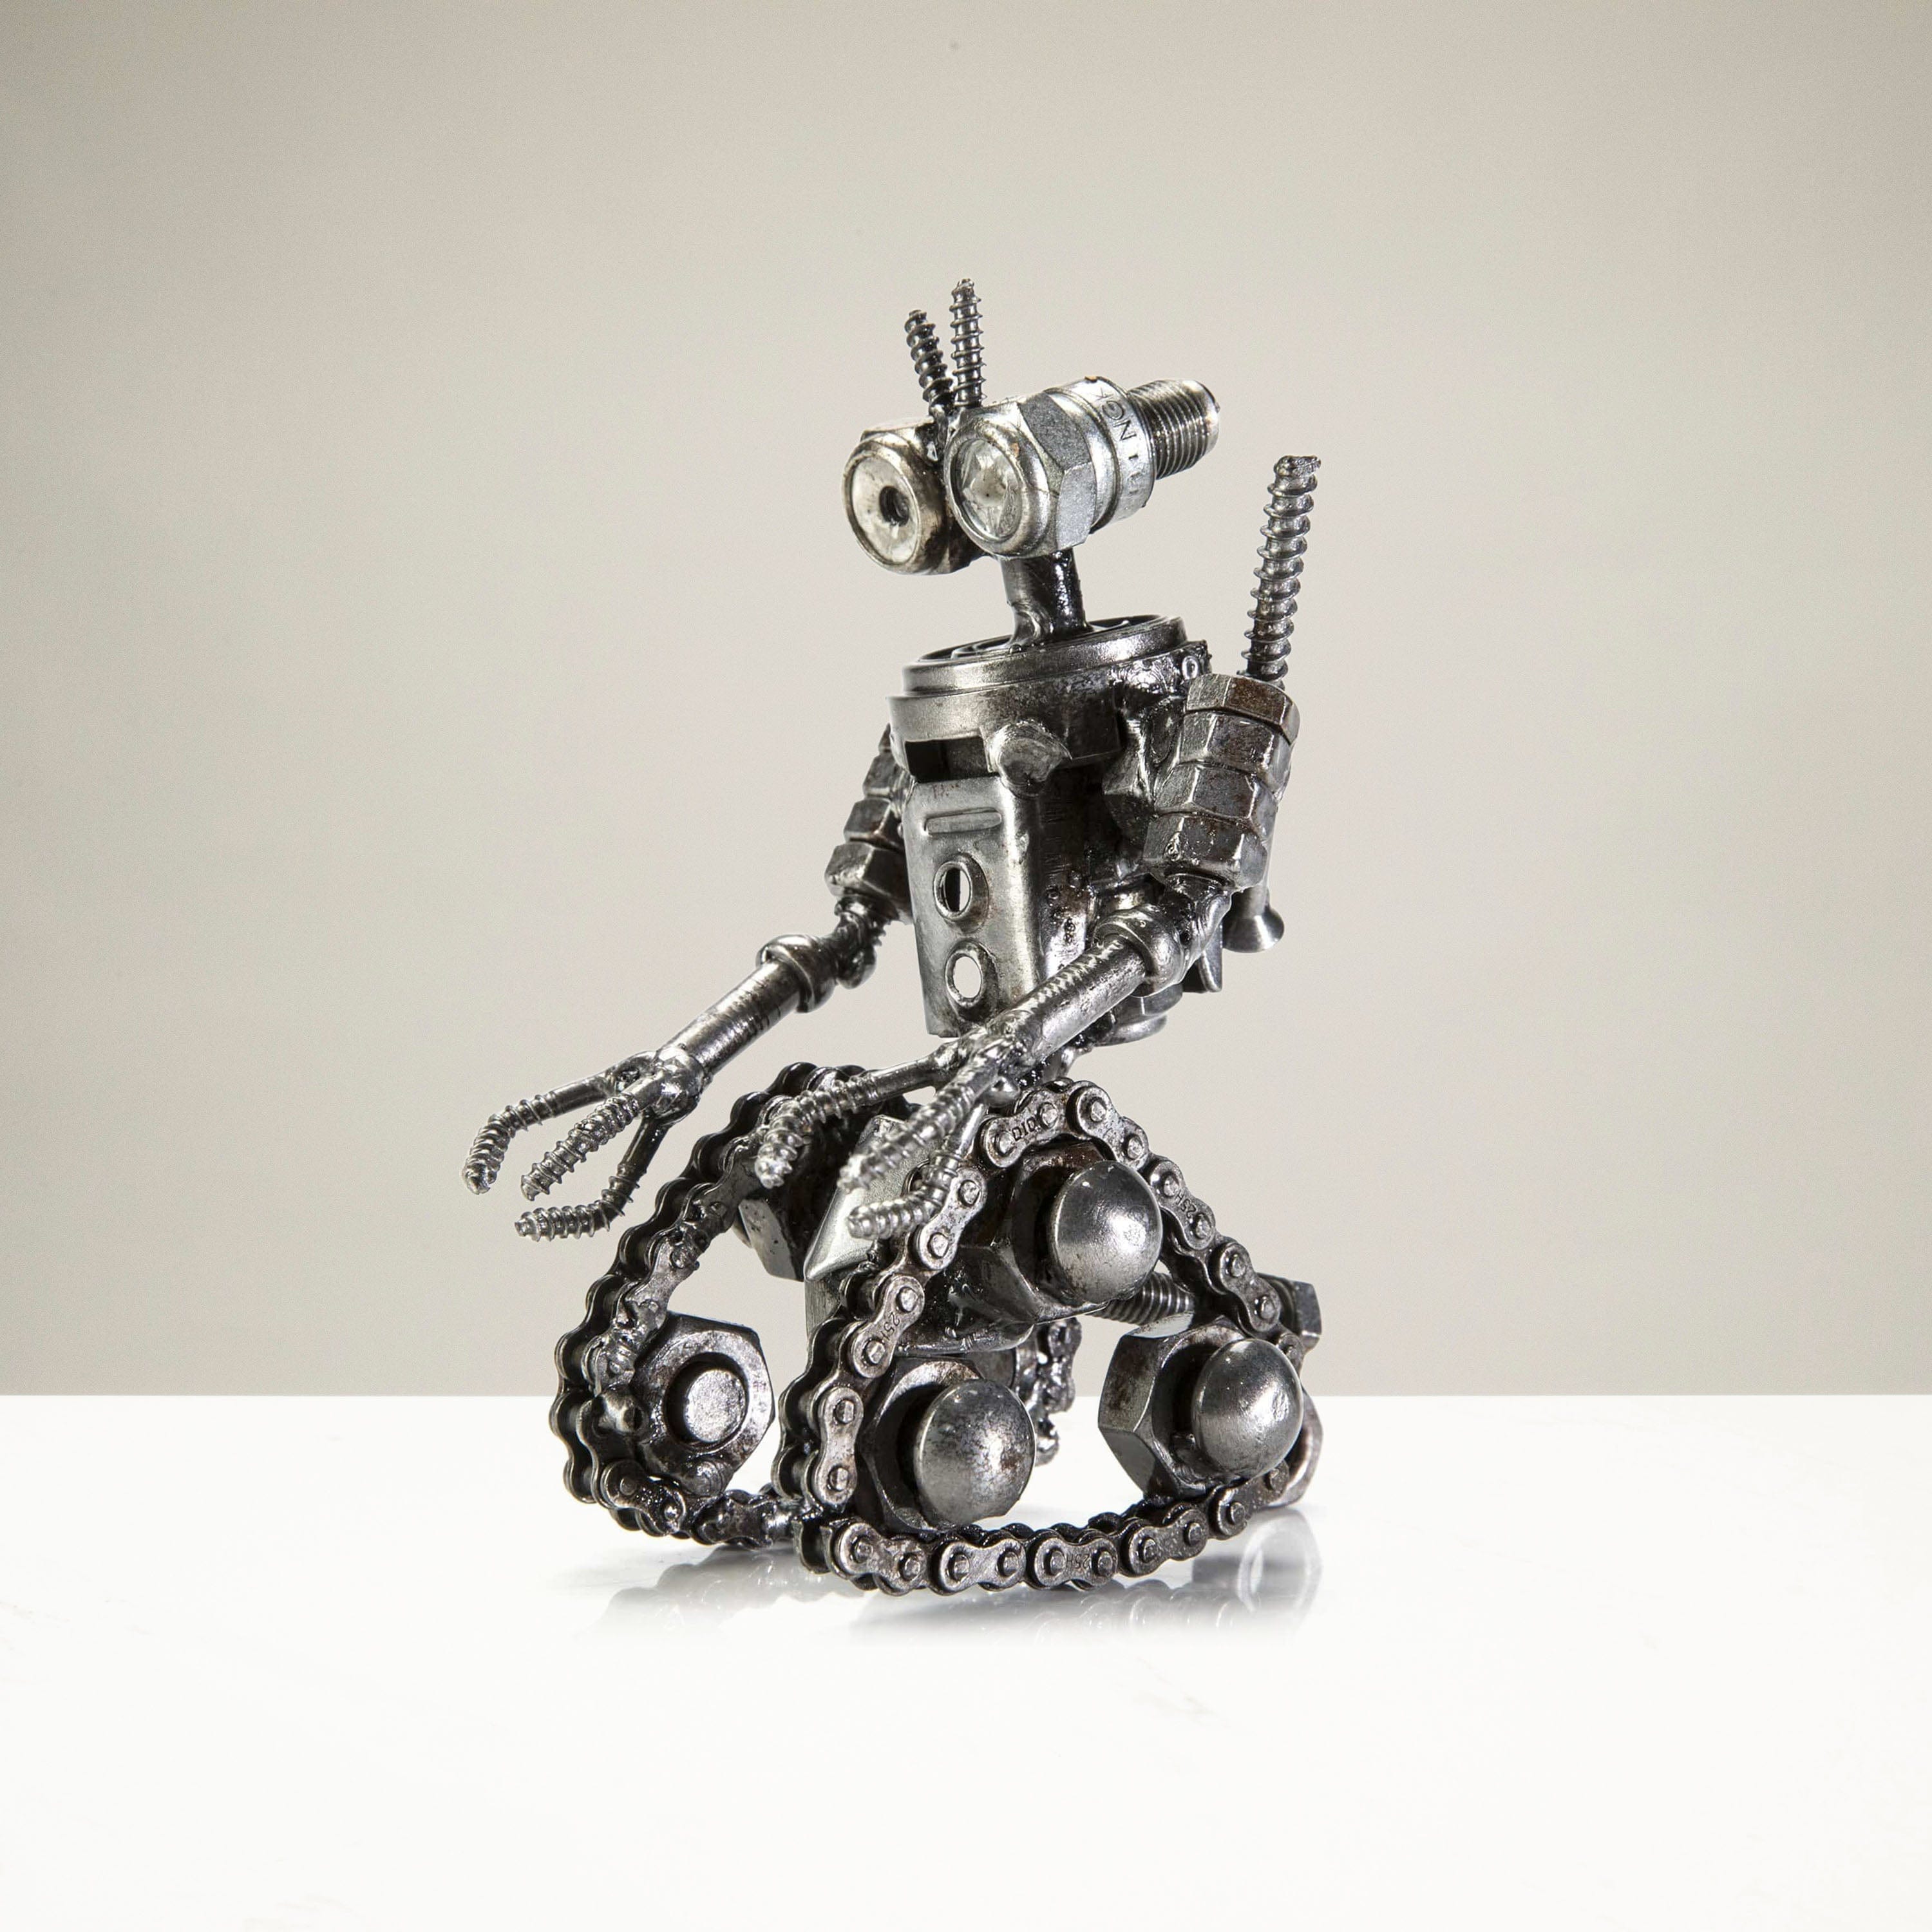 Kalifano Recycled Metal Art Johnny-5 Inspired Recycled Metal Sculpture RMS-250J5-N